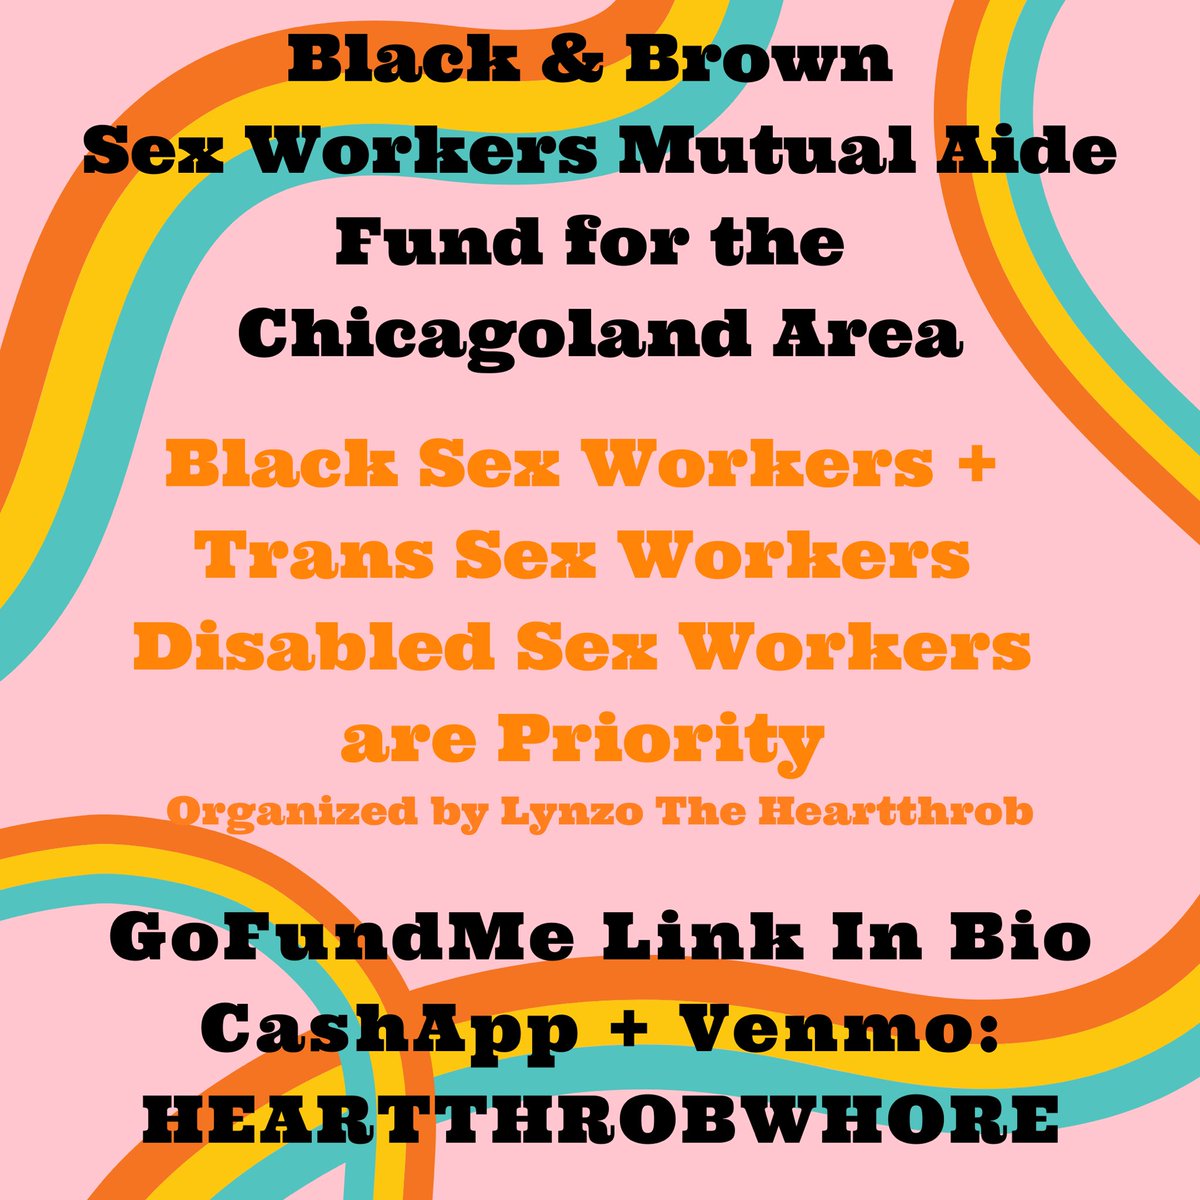 SOMEONE YOU LOVE IS A S*X WORKER-It’s time to center the voices of those who work in this field-Trans Lives Matter-Black Sex Workers Lives Matter-Disabled Sex Workers MatterDECRIMNOWFor Resources:See stop  http://sesta.org  GoFundMe:  https://www.gofundme.com/f/sw-emergency-mutual-aid-fund?utm_medium=copy_link&utm_source=customer&utm_campaign=p_na+share-sheet&rcid=b572d06559f746bd937572d17ba17079